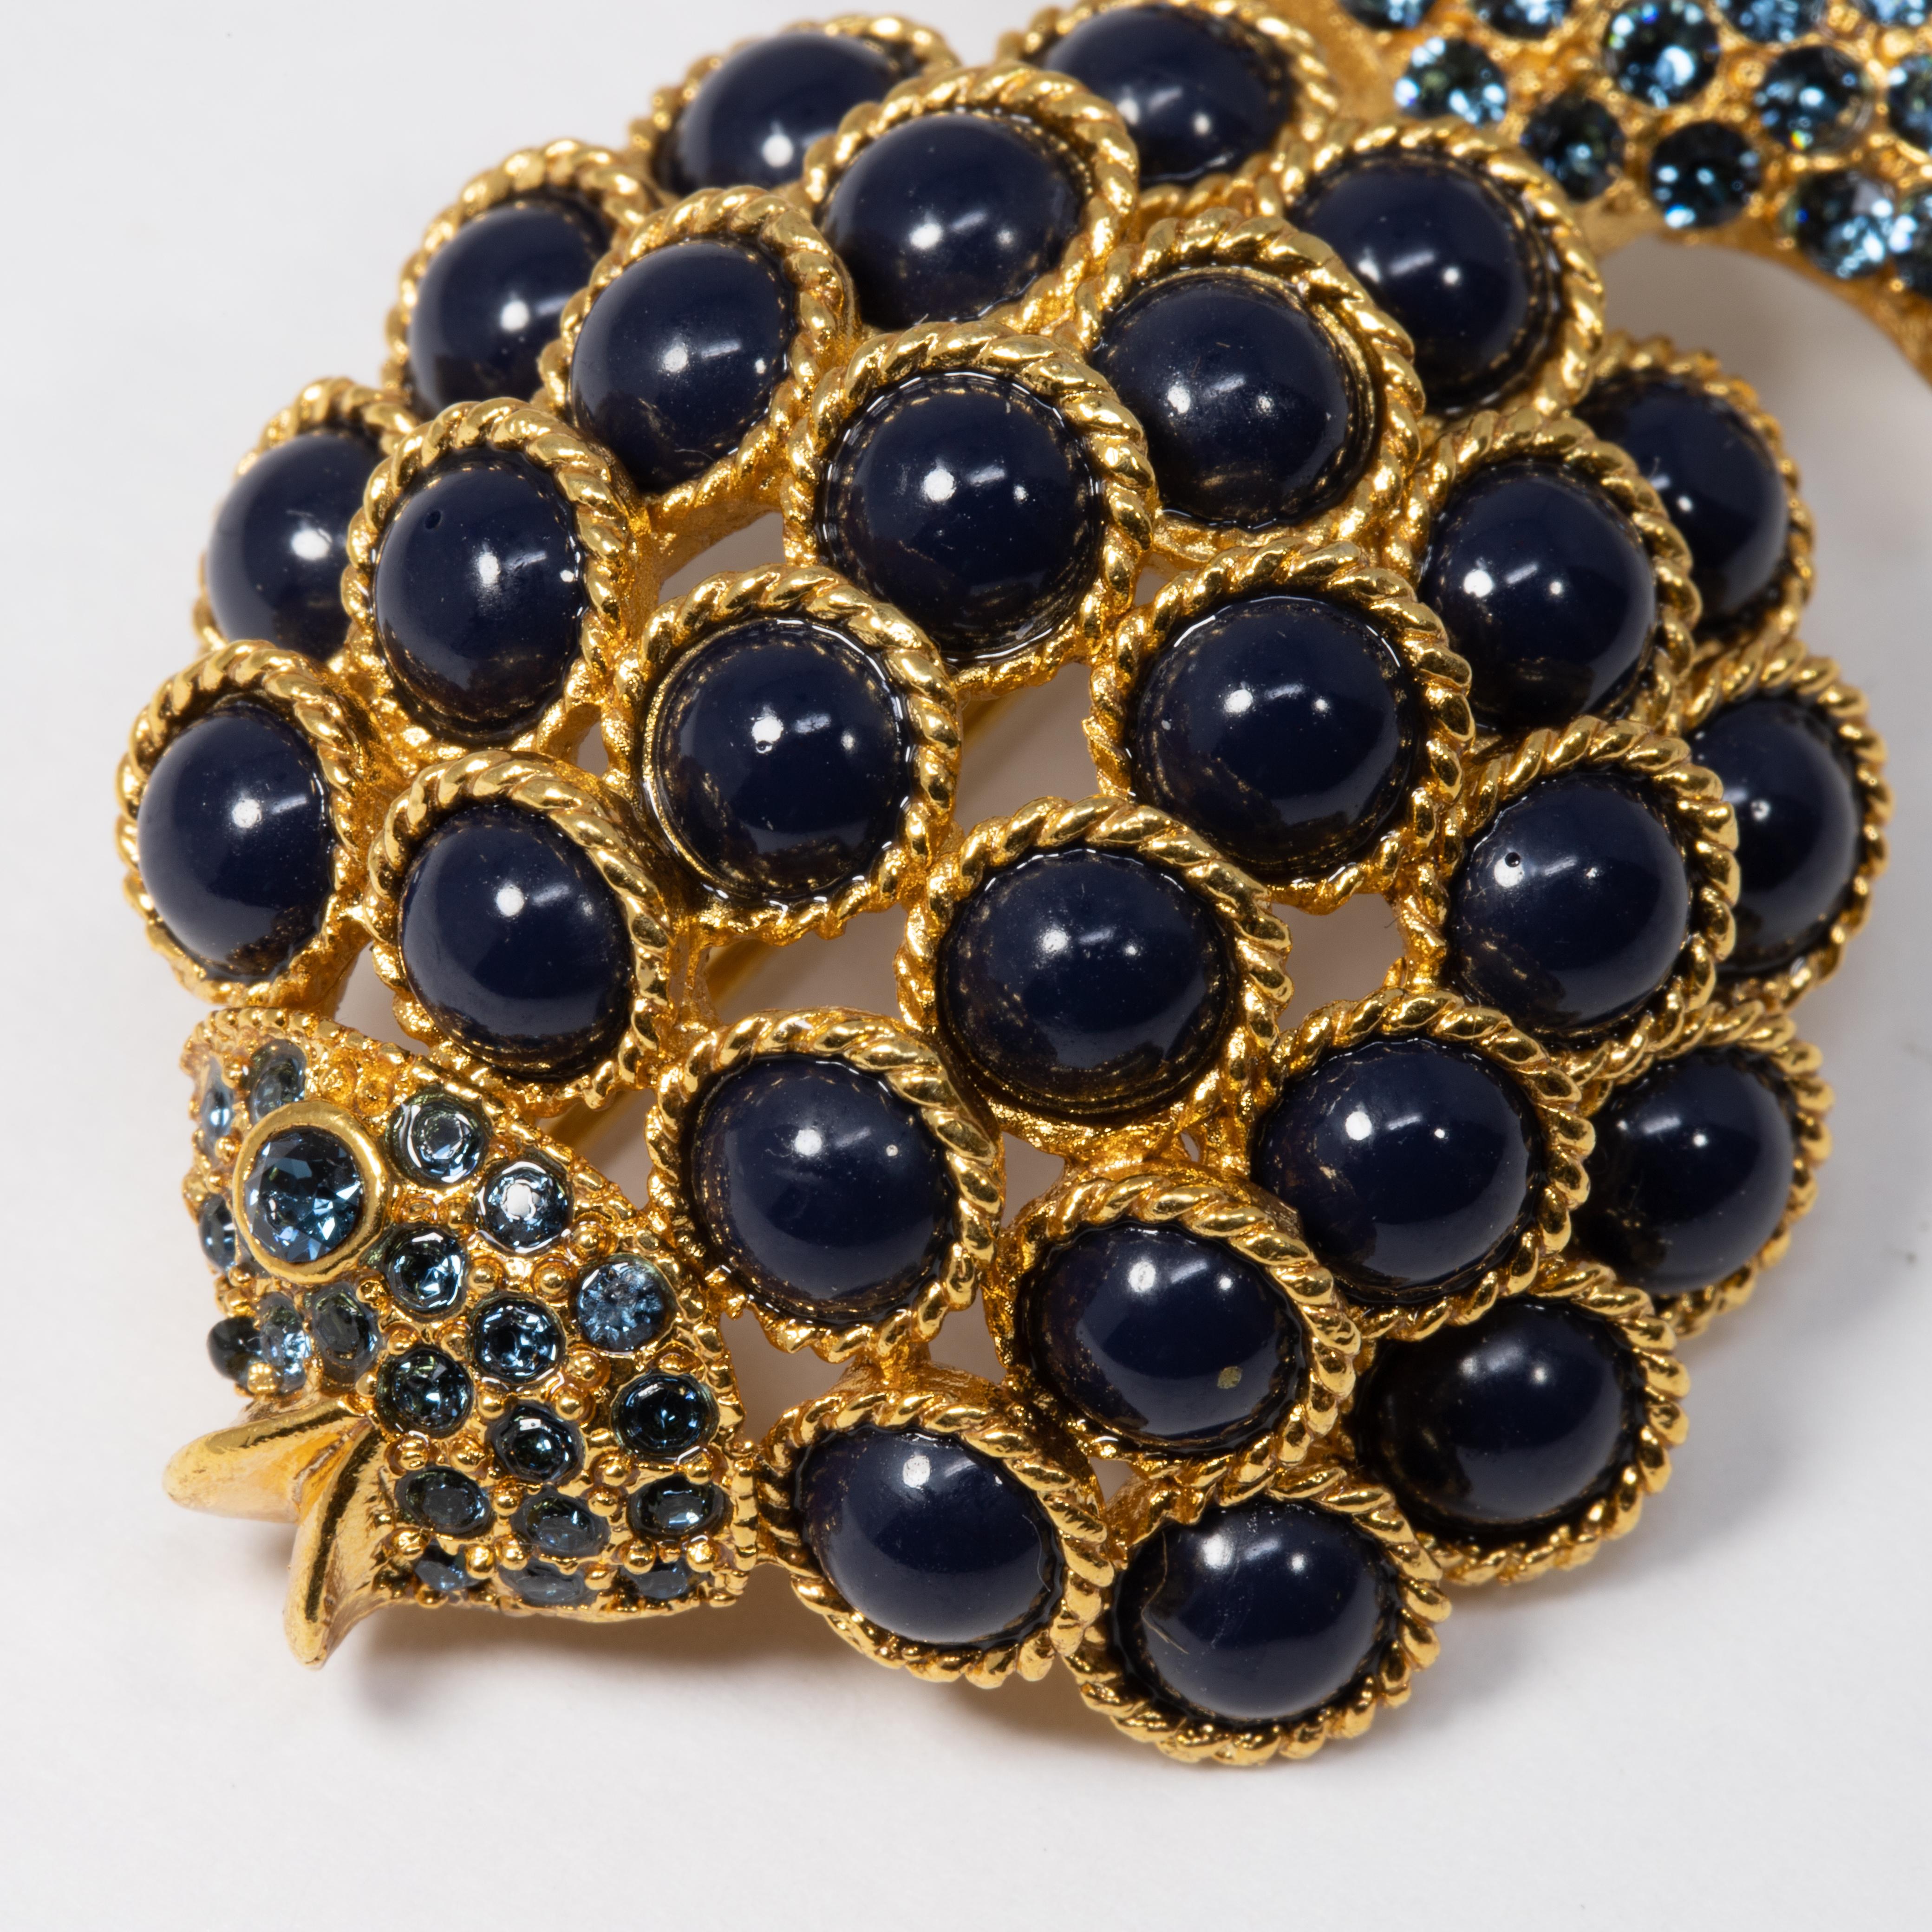 Oscar de la Renta's goldtone fish decorated with dark blue cabochon and crystals. Add a sophisticated touch to your outfit!

Hallmarks: Oscar de la Renta, Made in USA